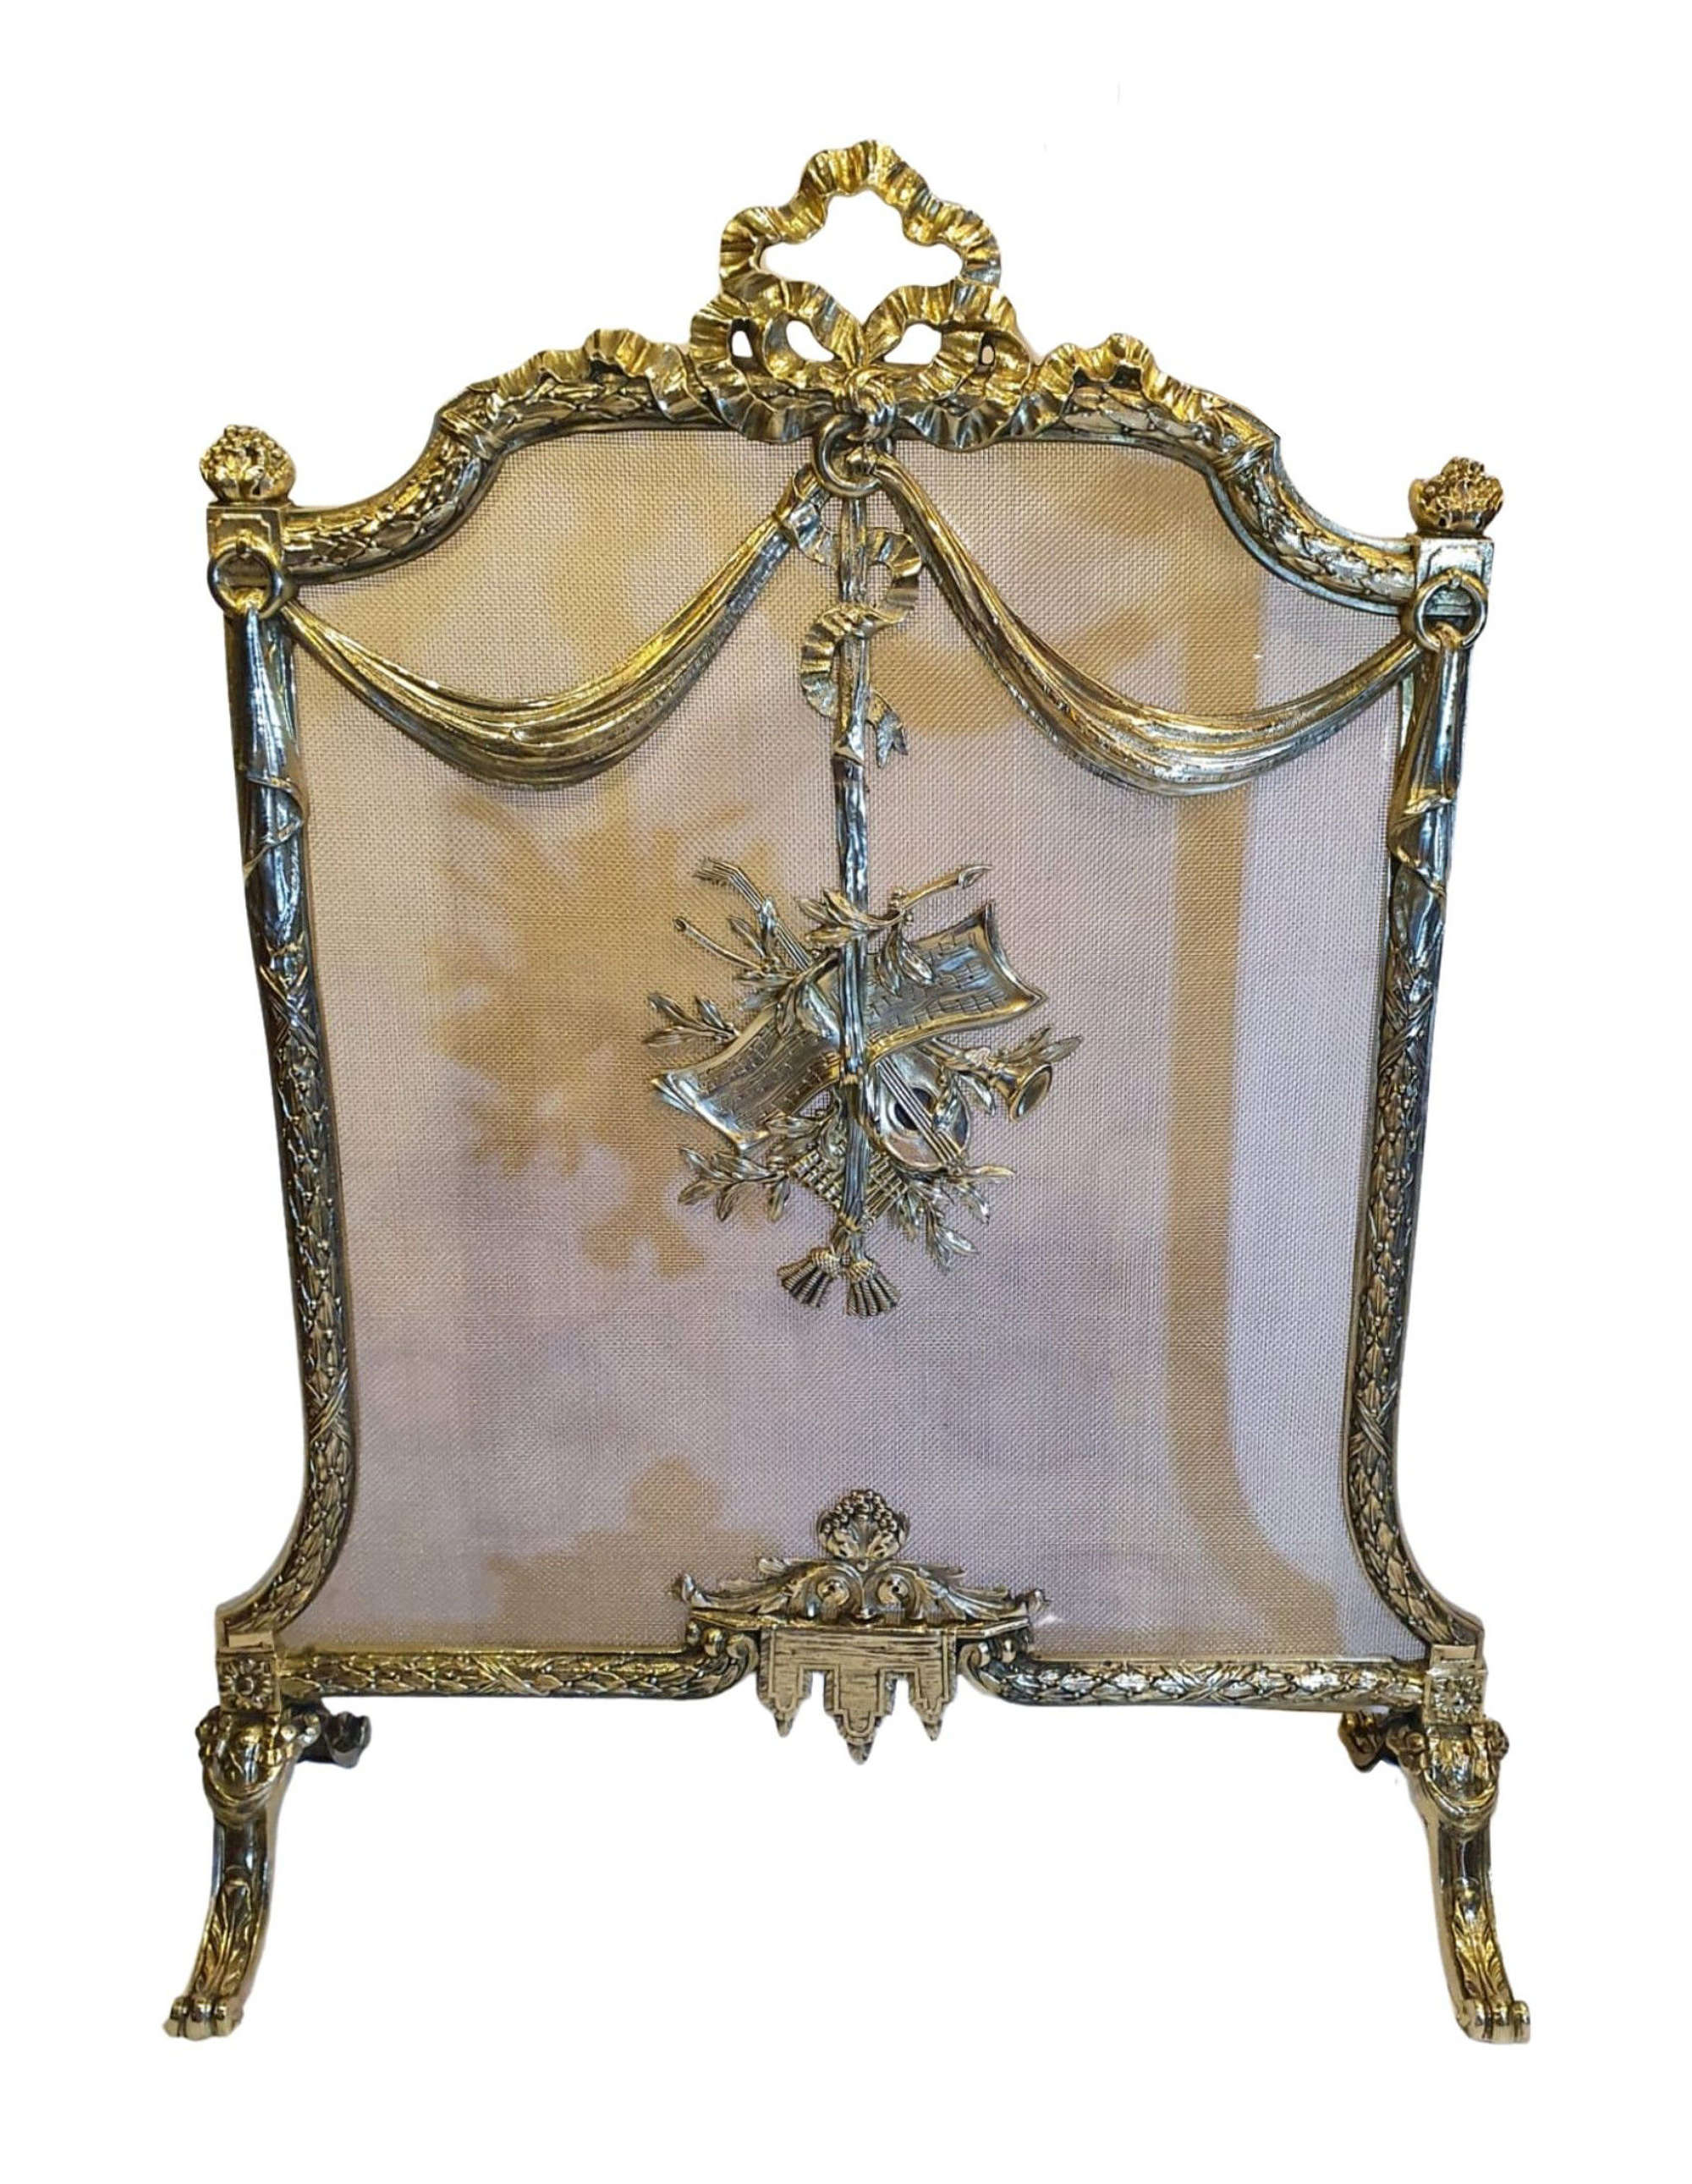 A Stunning 19th Century Fully Restored Polished Brass Fire Screen